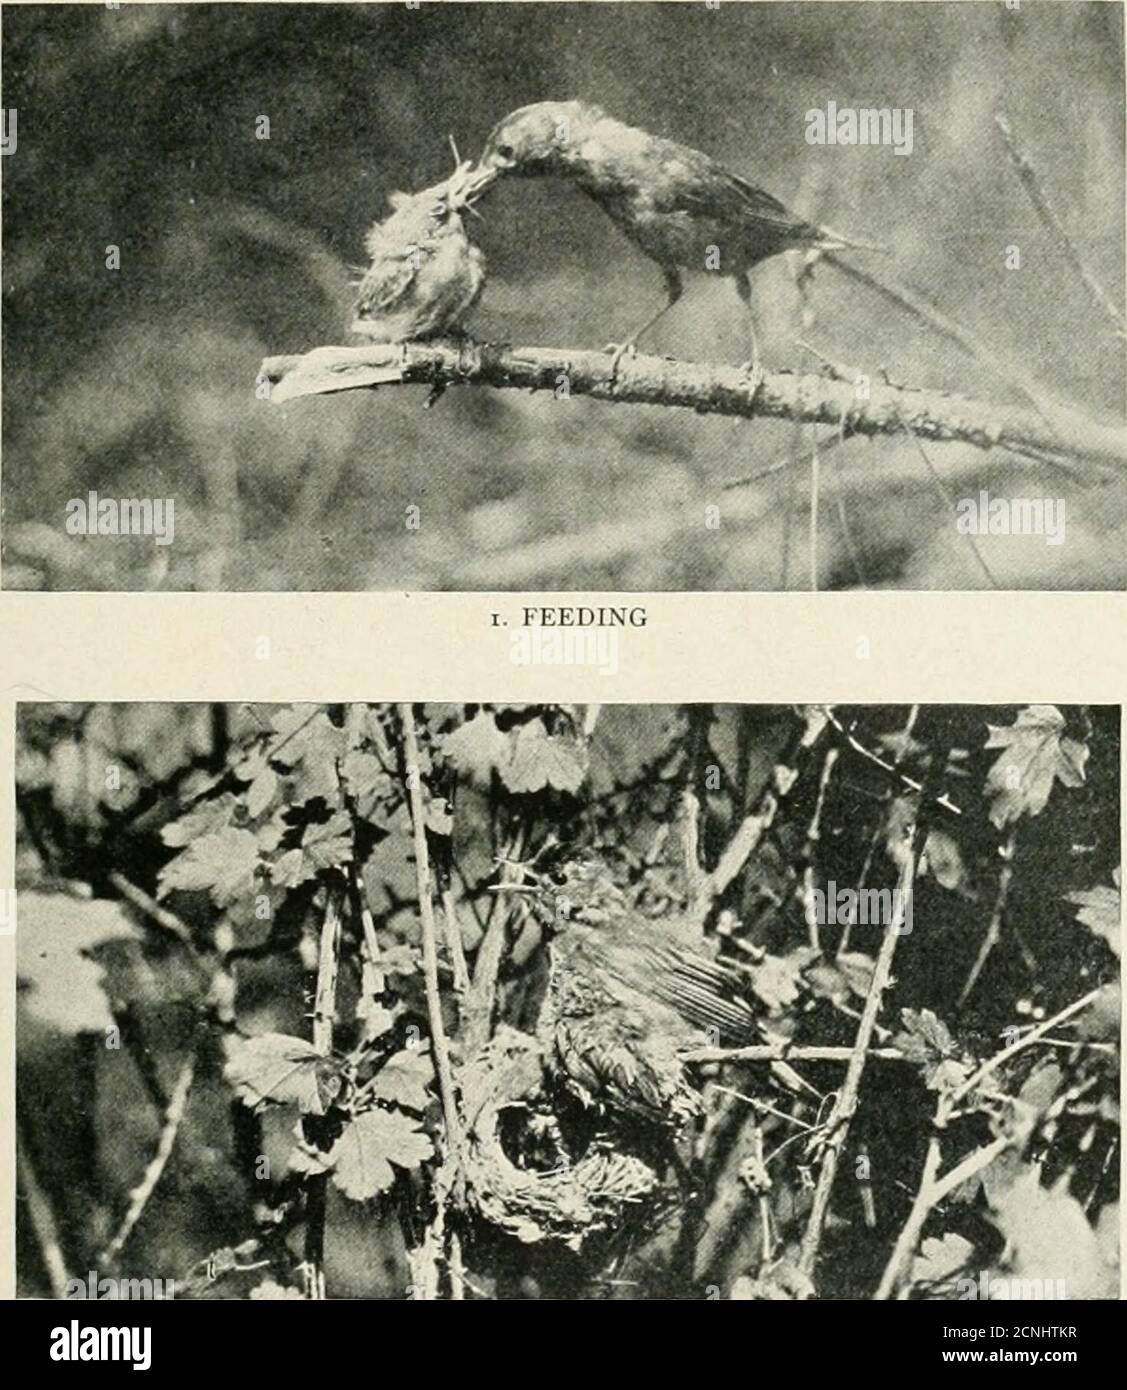 . Audubon . 3. ON GUARD THREE VIEWS OF THE YELLOW WARBLER By Albert D. McGrew, Pittsburgh, Pa. (199) My Neighbors, the Nighthawks By S. R. MILLSWith Photographs bj the Author DURING the month of June, 1919, I was especially interested in a pairof Nighthawks which frequented the neighborhood of my home(Kingston, Ontario, Canada). From the garden I could watch thesebirds on their incessant sky-hunt for insects, each selecting its section of theupper air apart from the other. There was a peculiar fascination in watchingone of them climb so high in little ascending jerks, then to see him side-slip Stock Photo